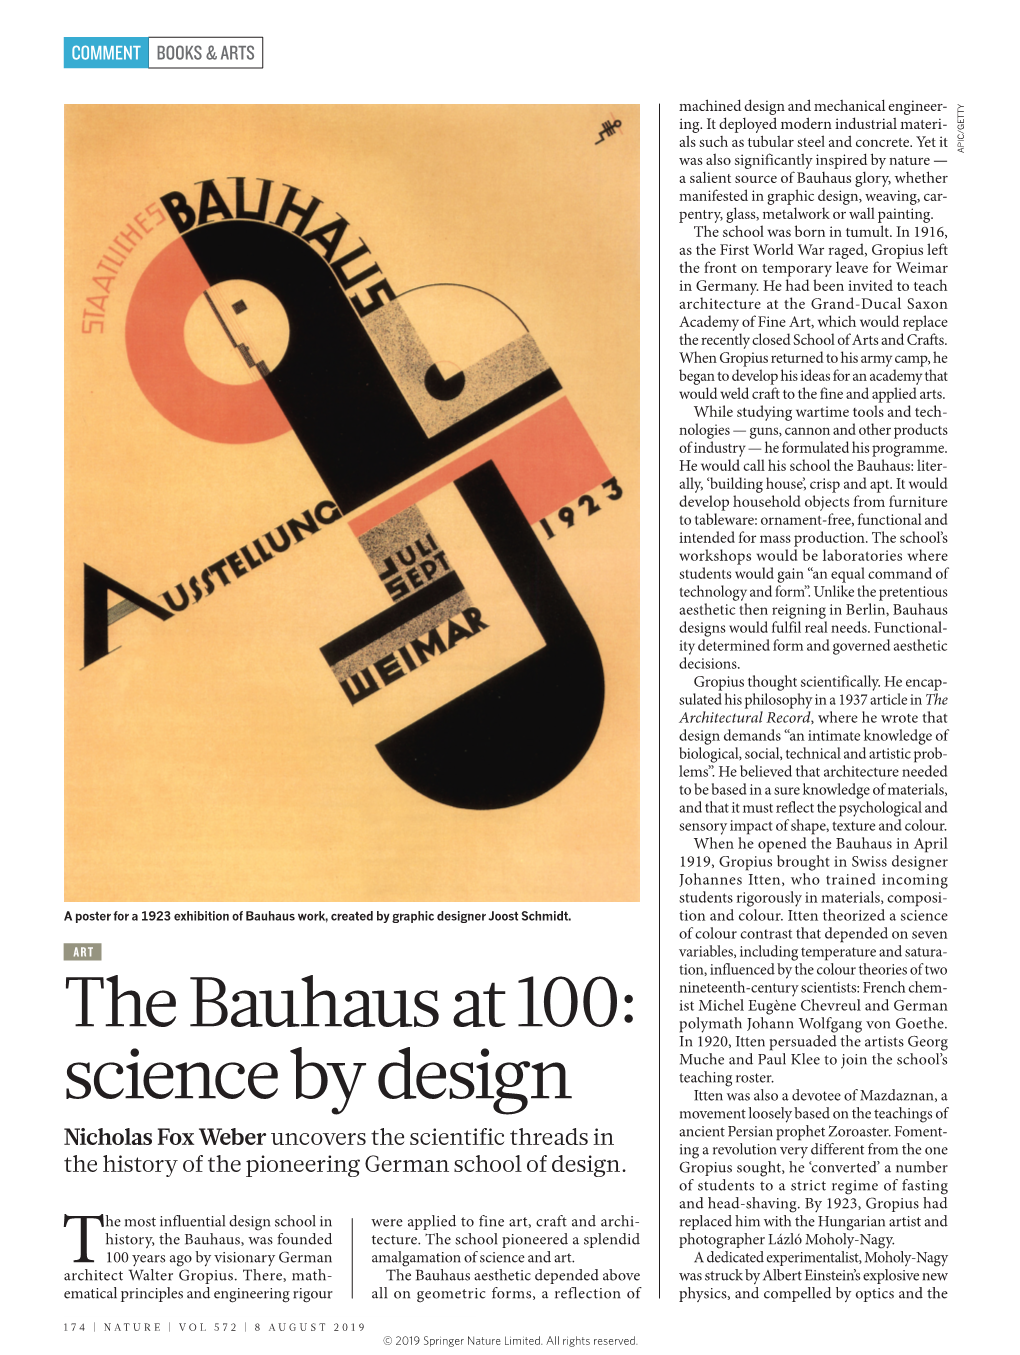 The Bauhaus at 100: Science by Design